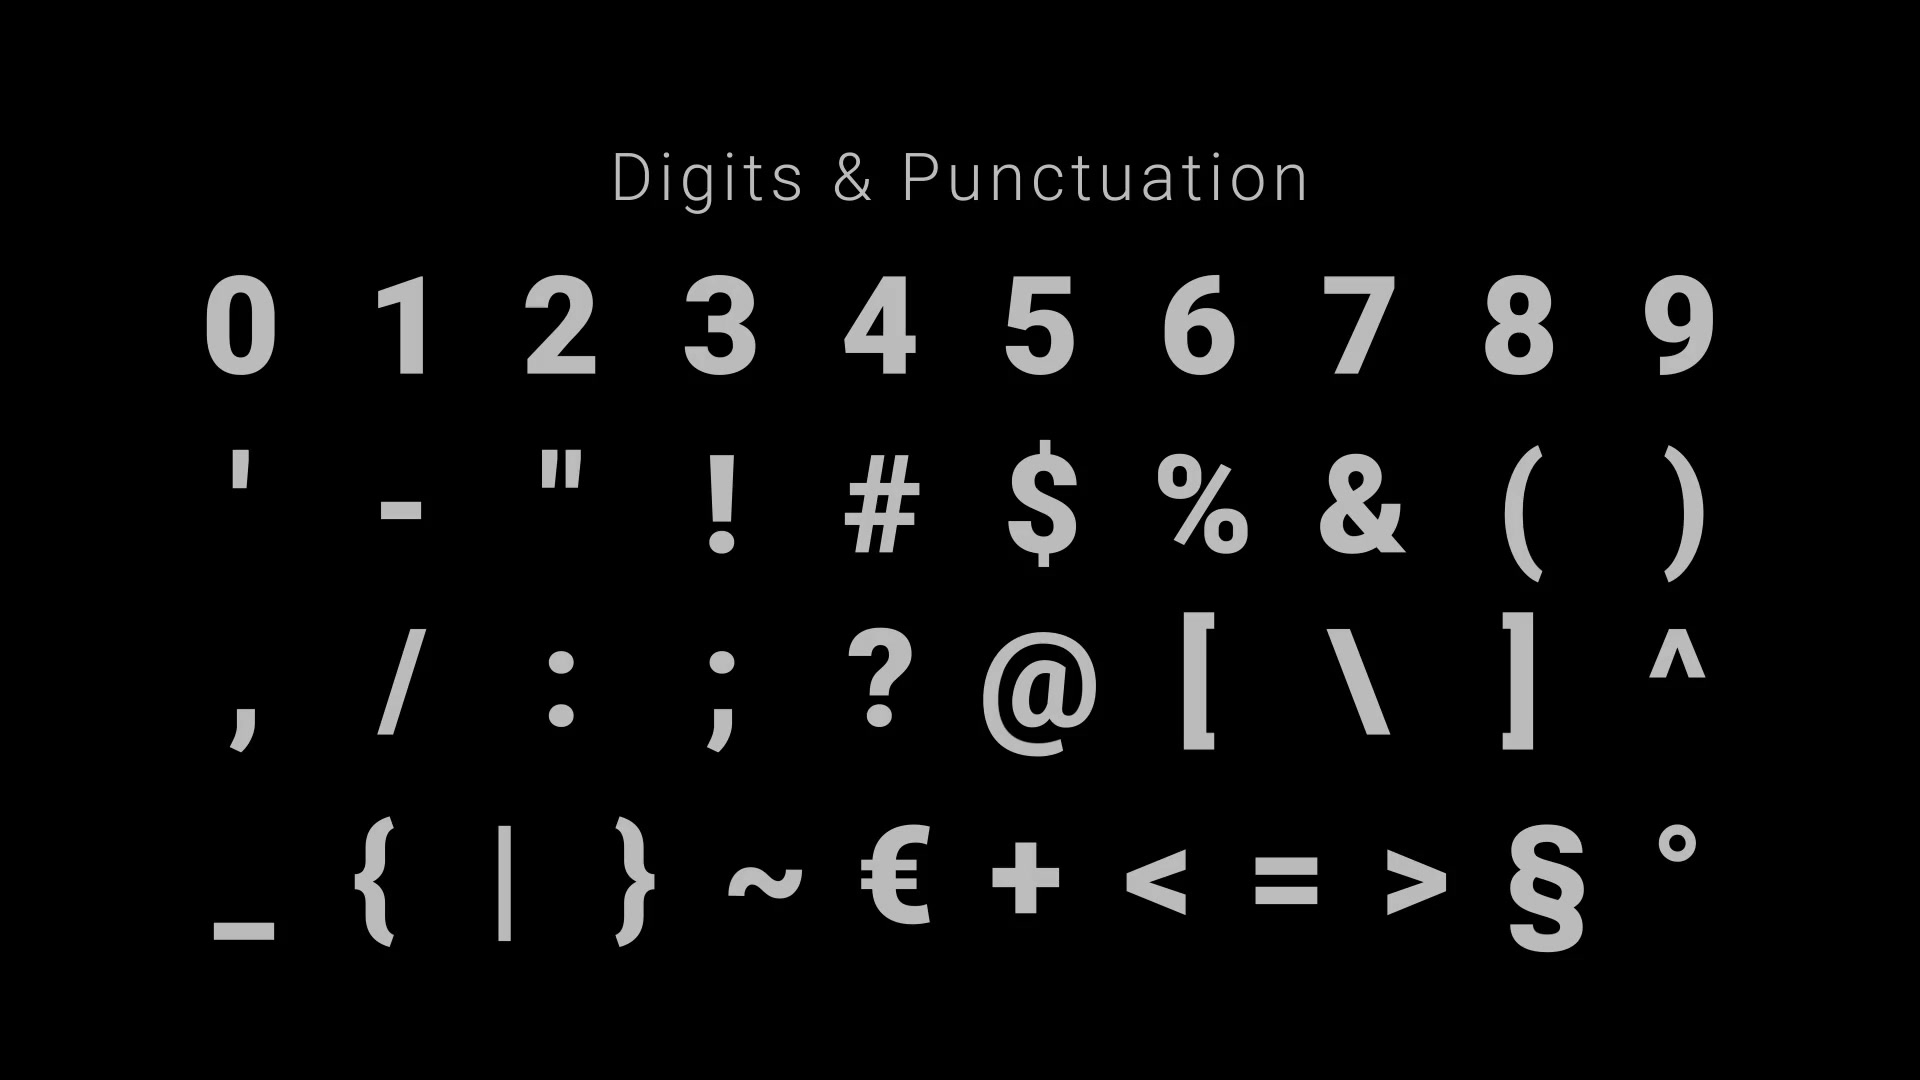 PolyNoise Alphabet Animated Typeface - Download Videohive 16871115